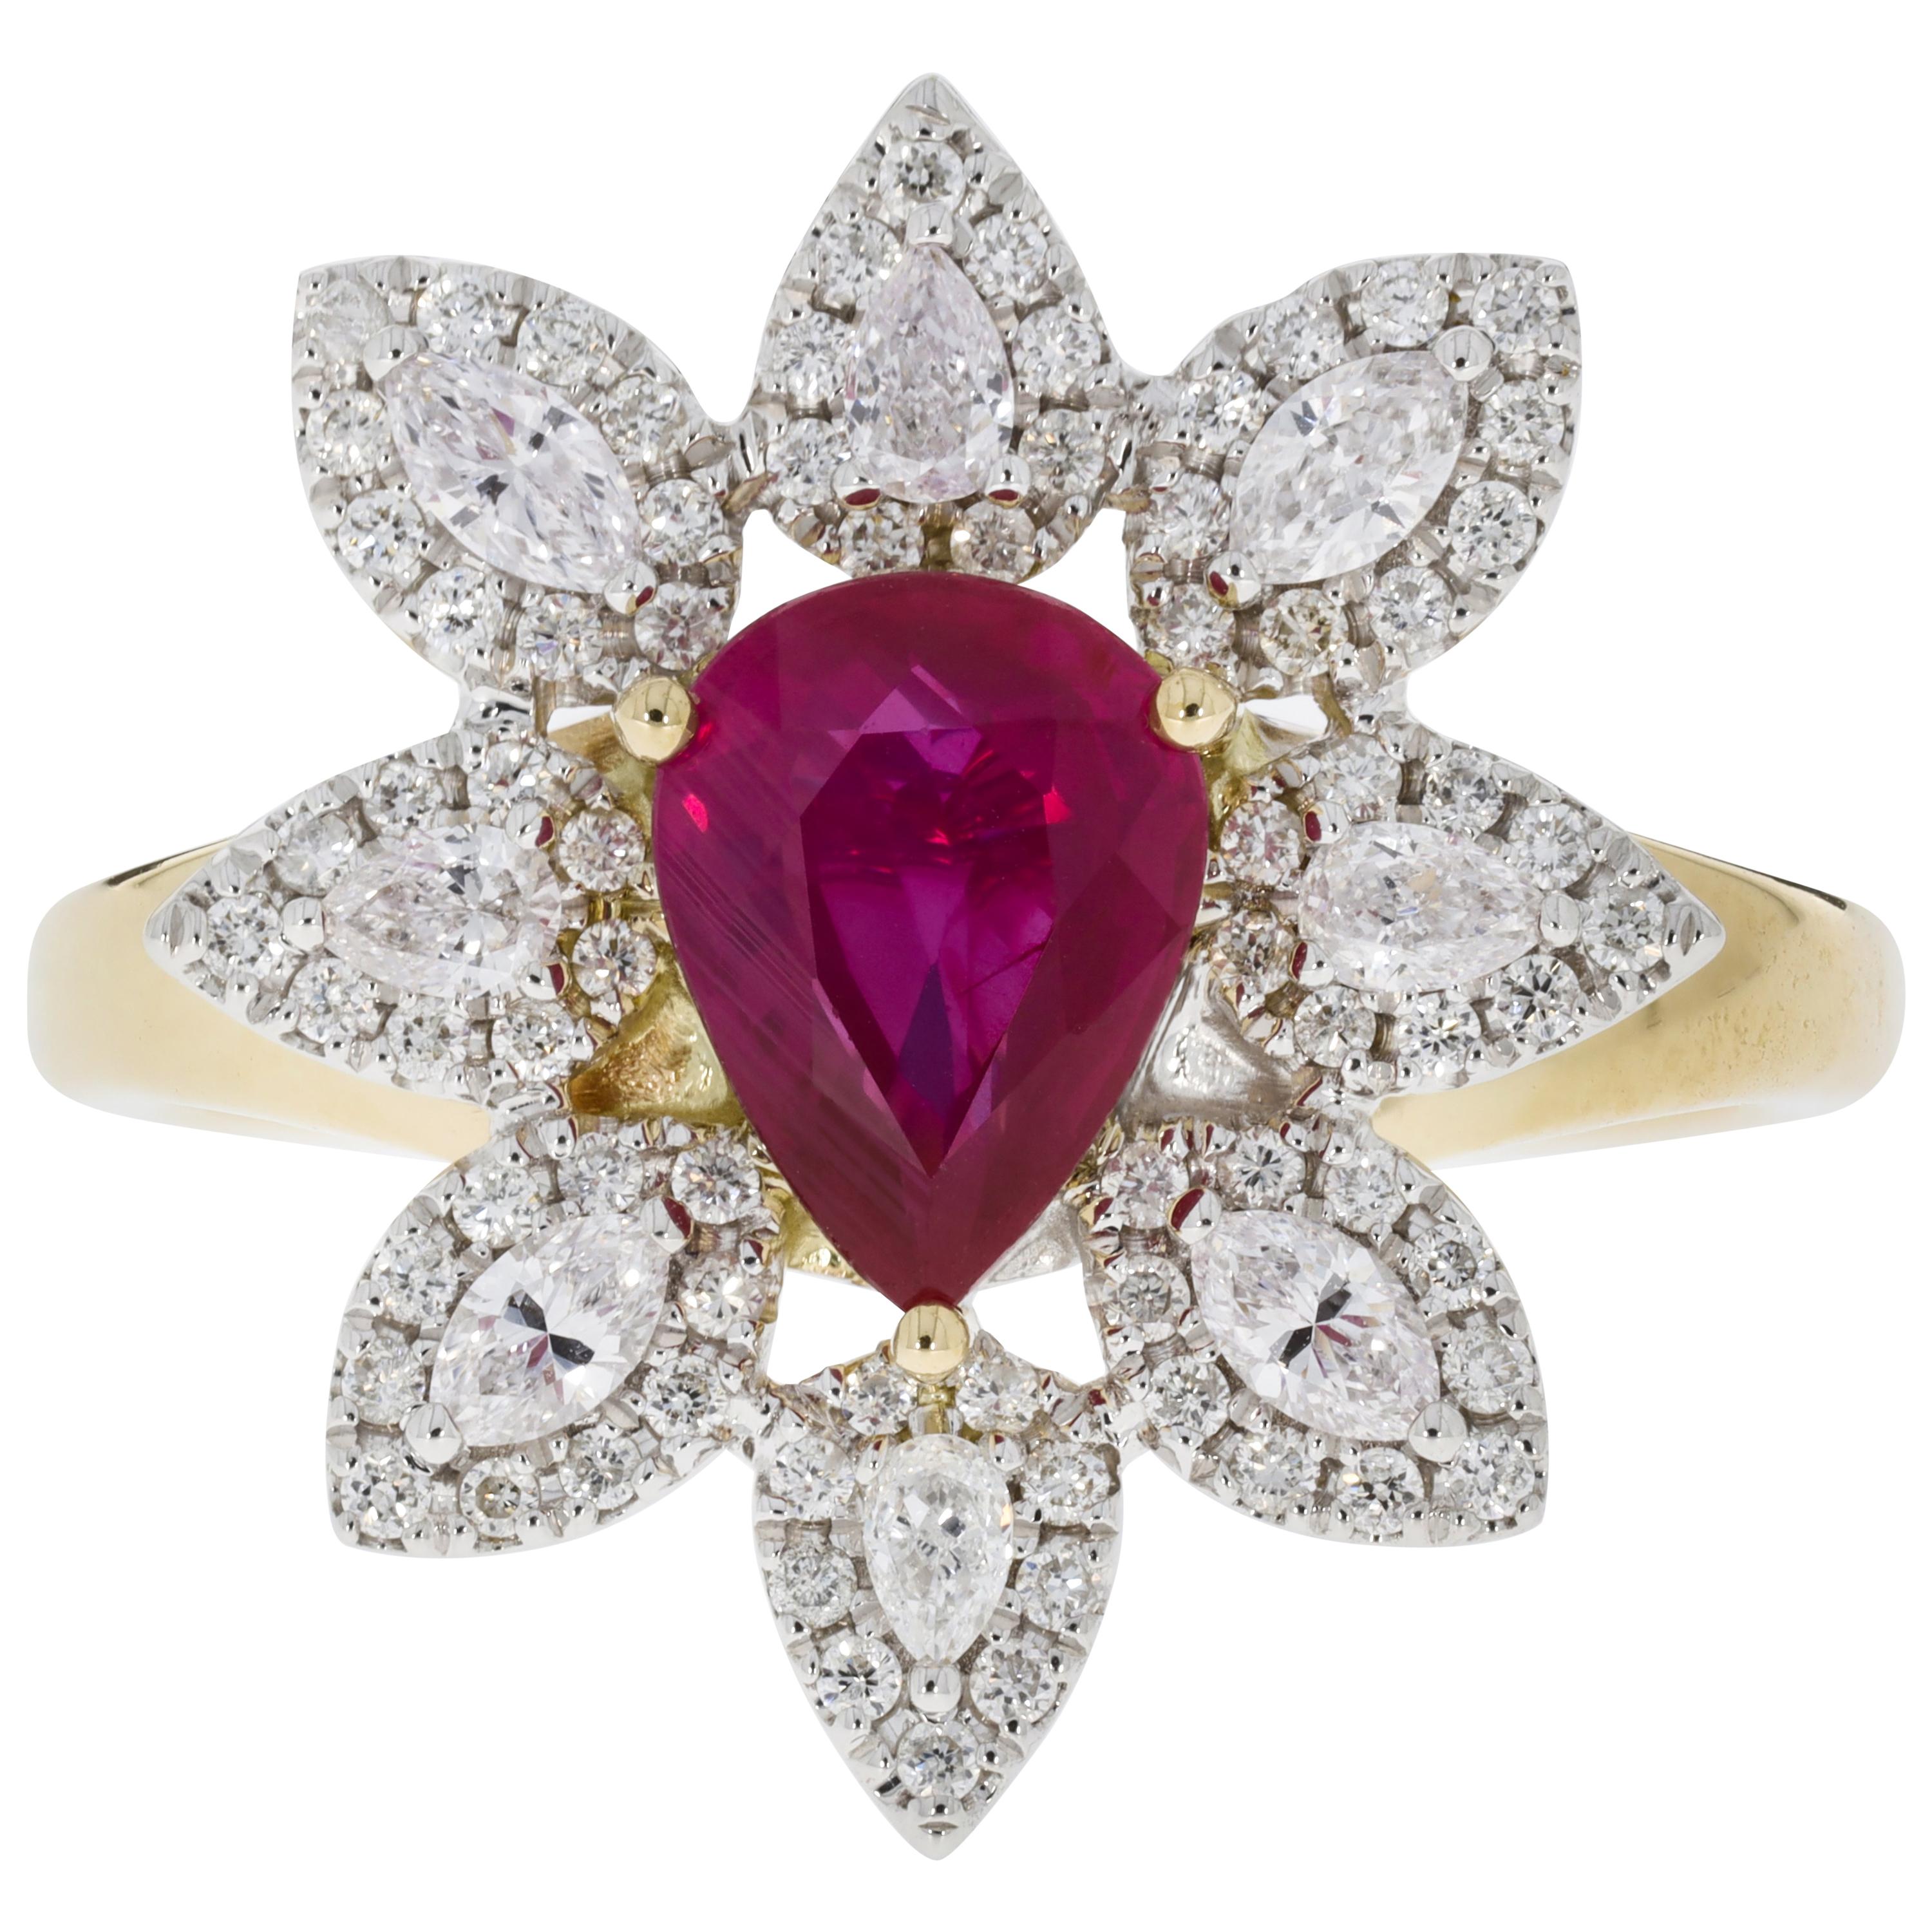 Gem Bleu 1.29 Ct Unheated Ruby in 14k Two Tone Gold with 0.58 Tct Diamond Accent For Sale